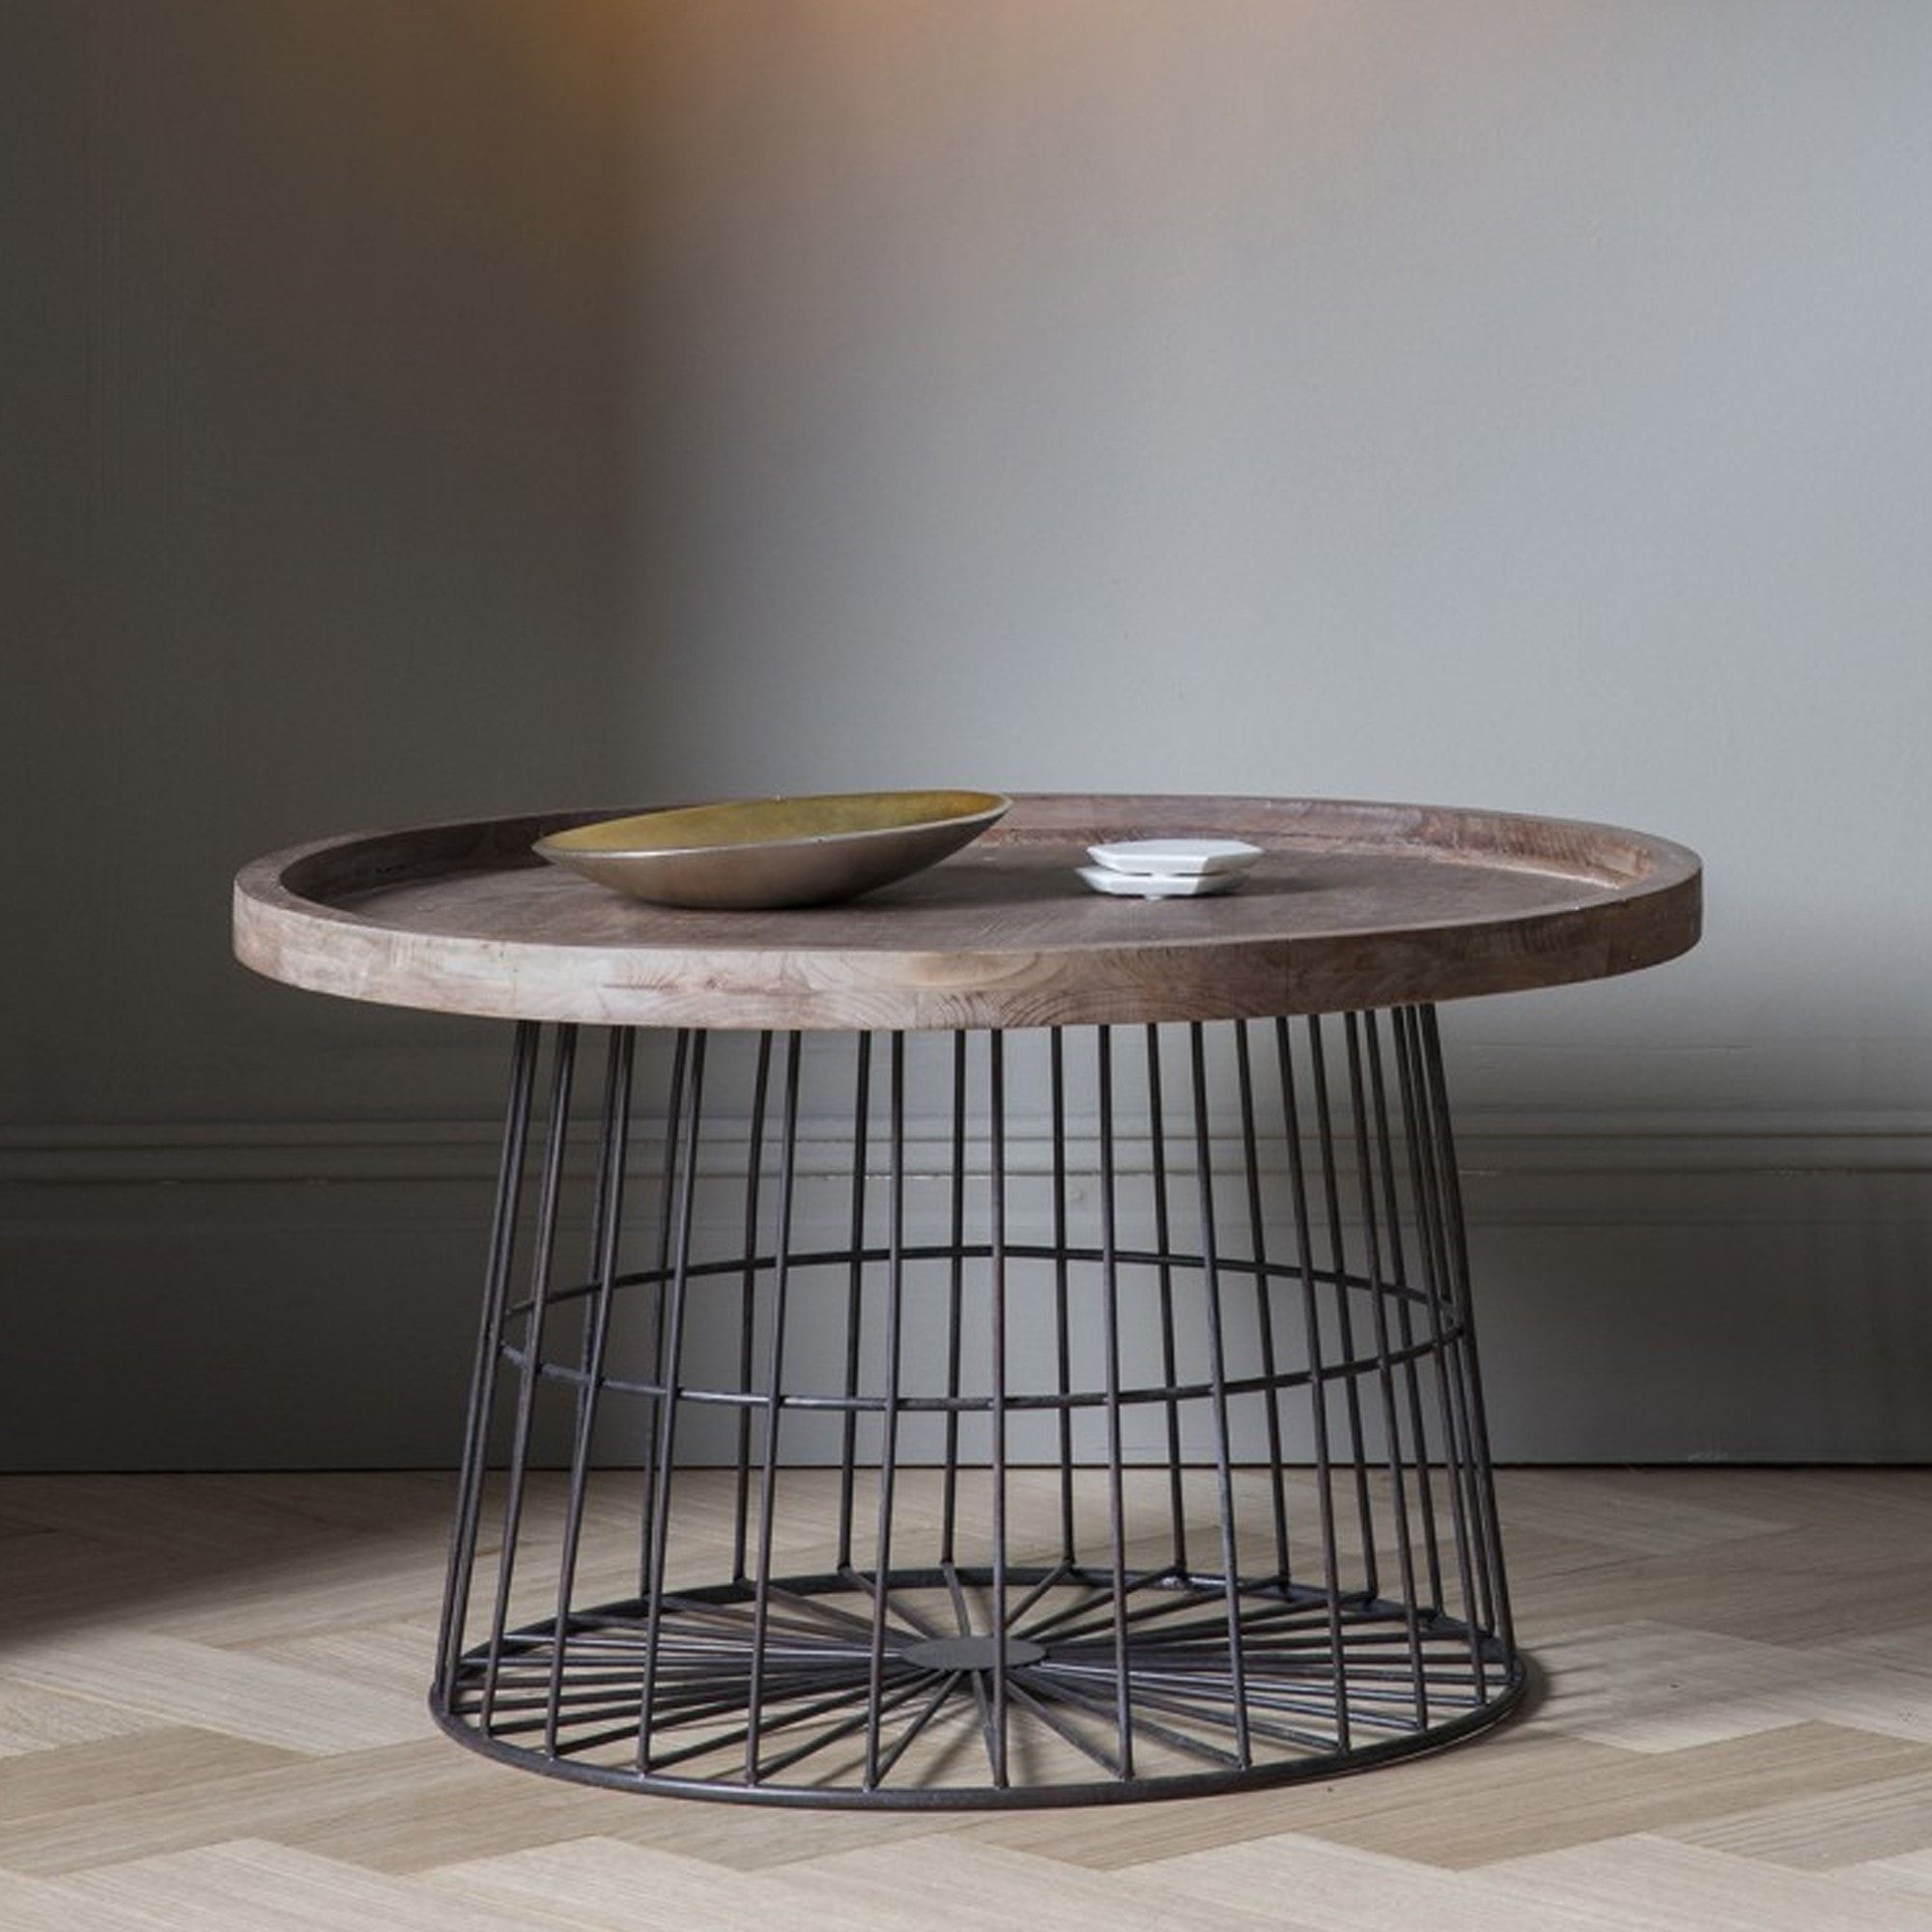 Menzies Coffee Table | Round Coffee Tables | Industrial Coffee Tables With Round Industrial Coffee Tables (View 7 of 15)